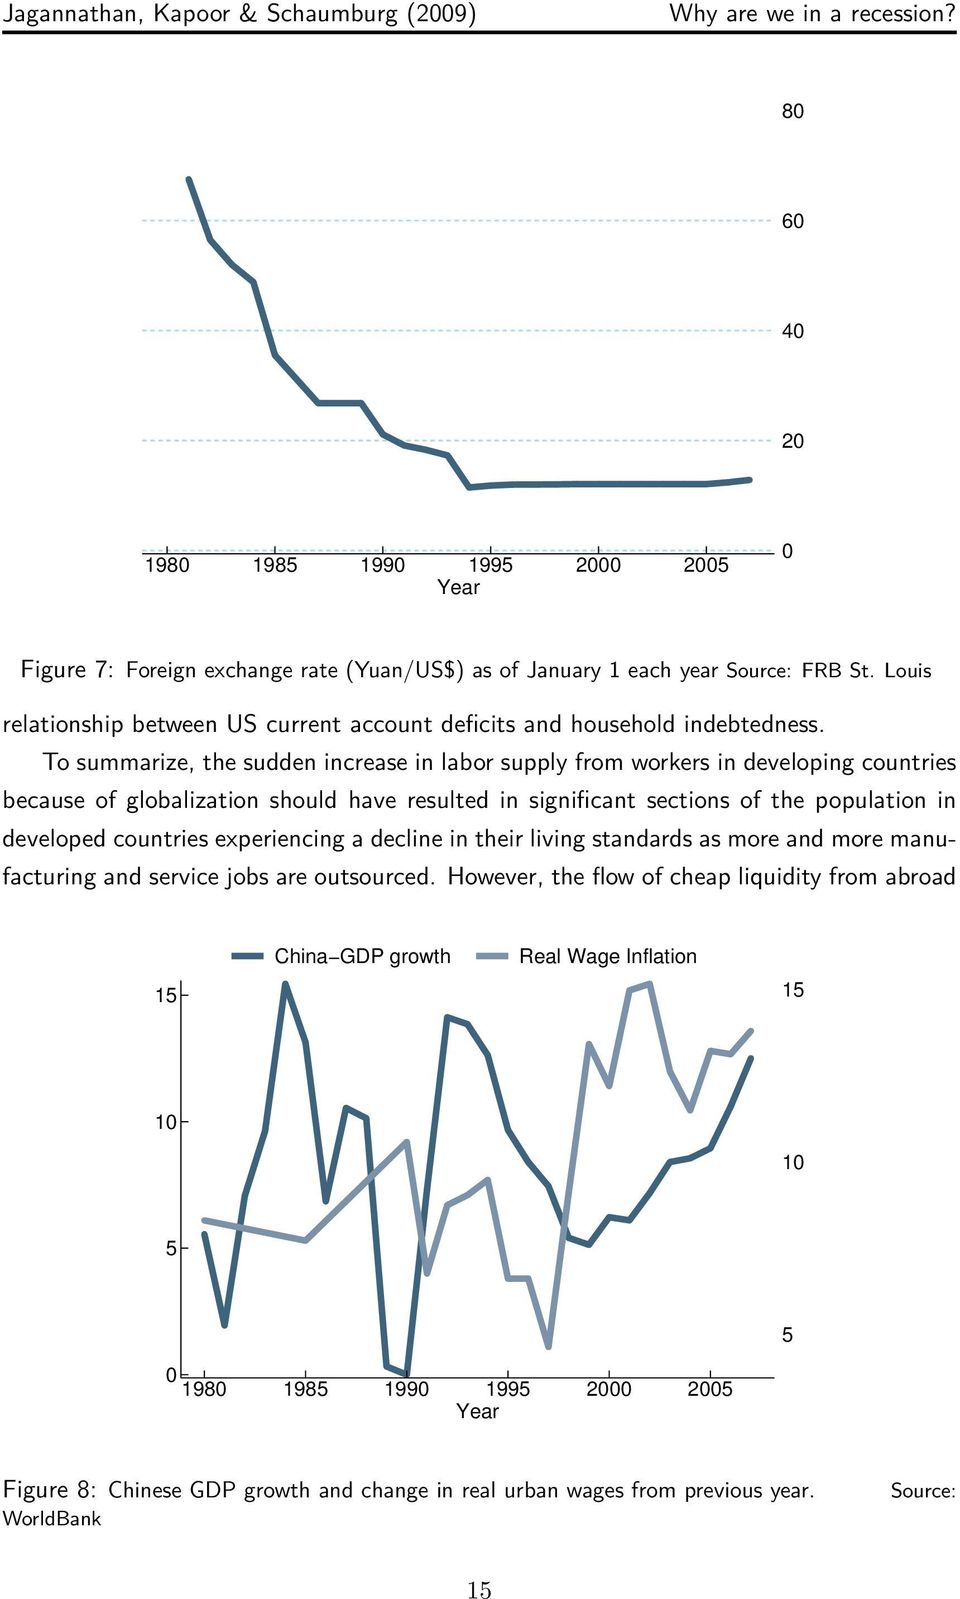 To summarize, the sudden increase in labor supply from workers in developing countries because of globalization should have resulted in significant sections of the population in developed